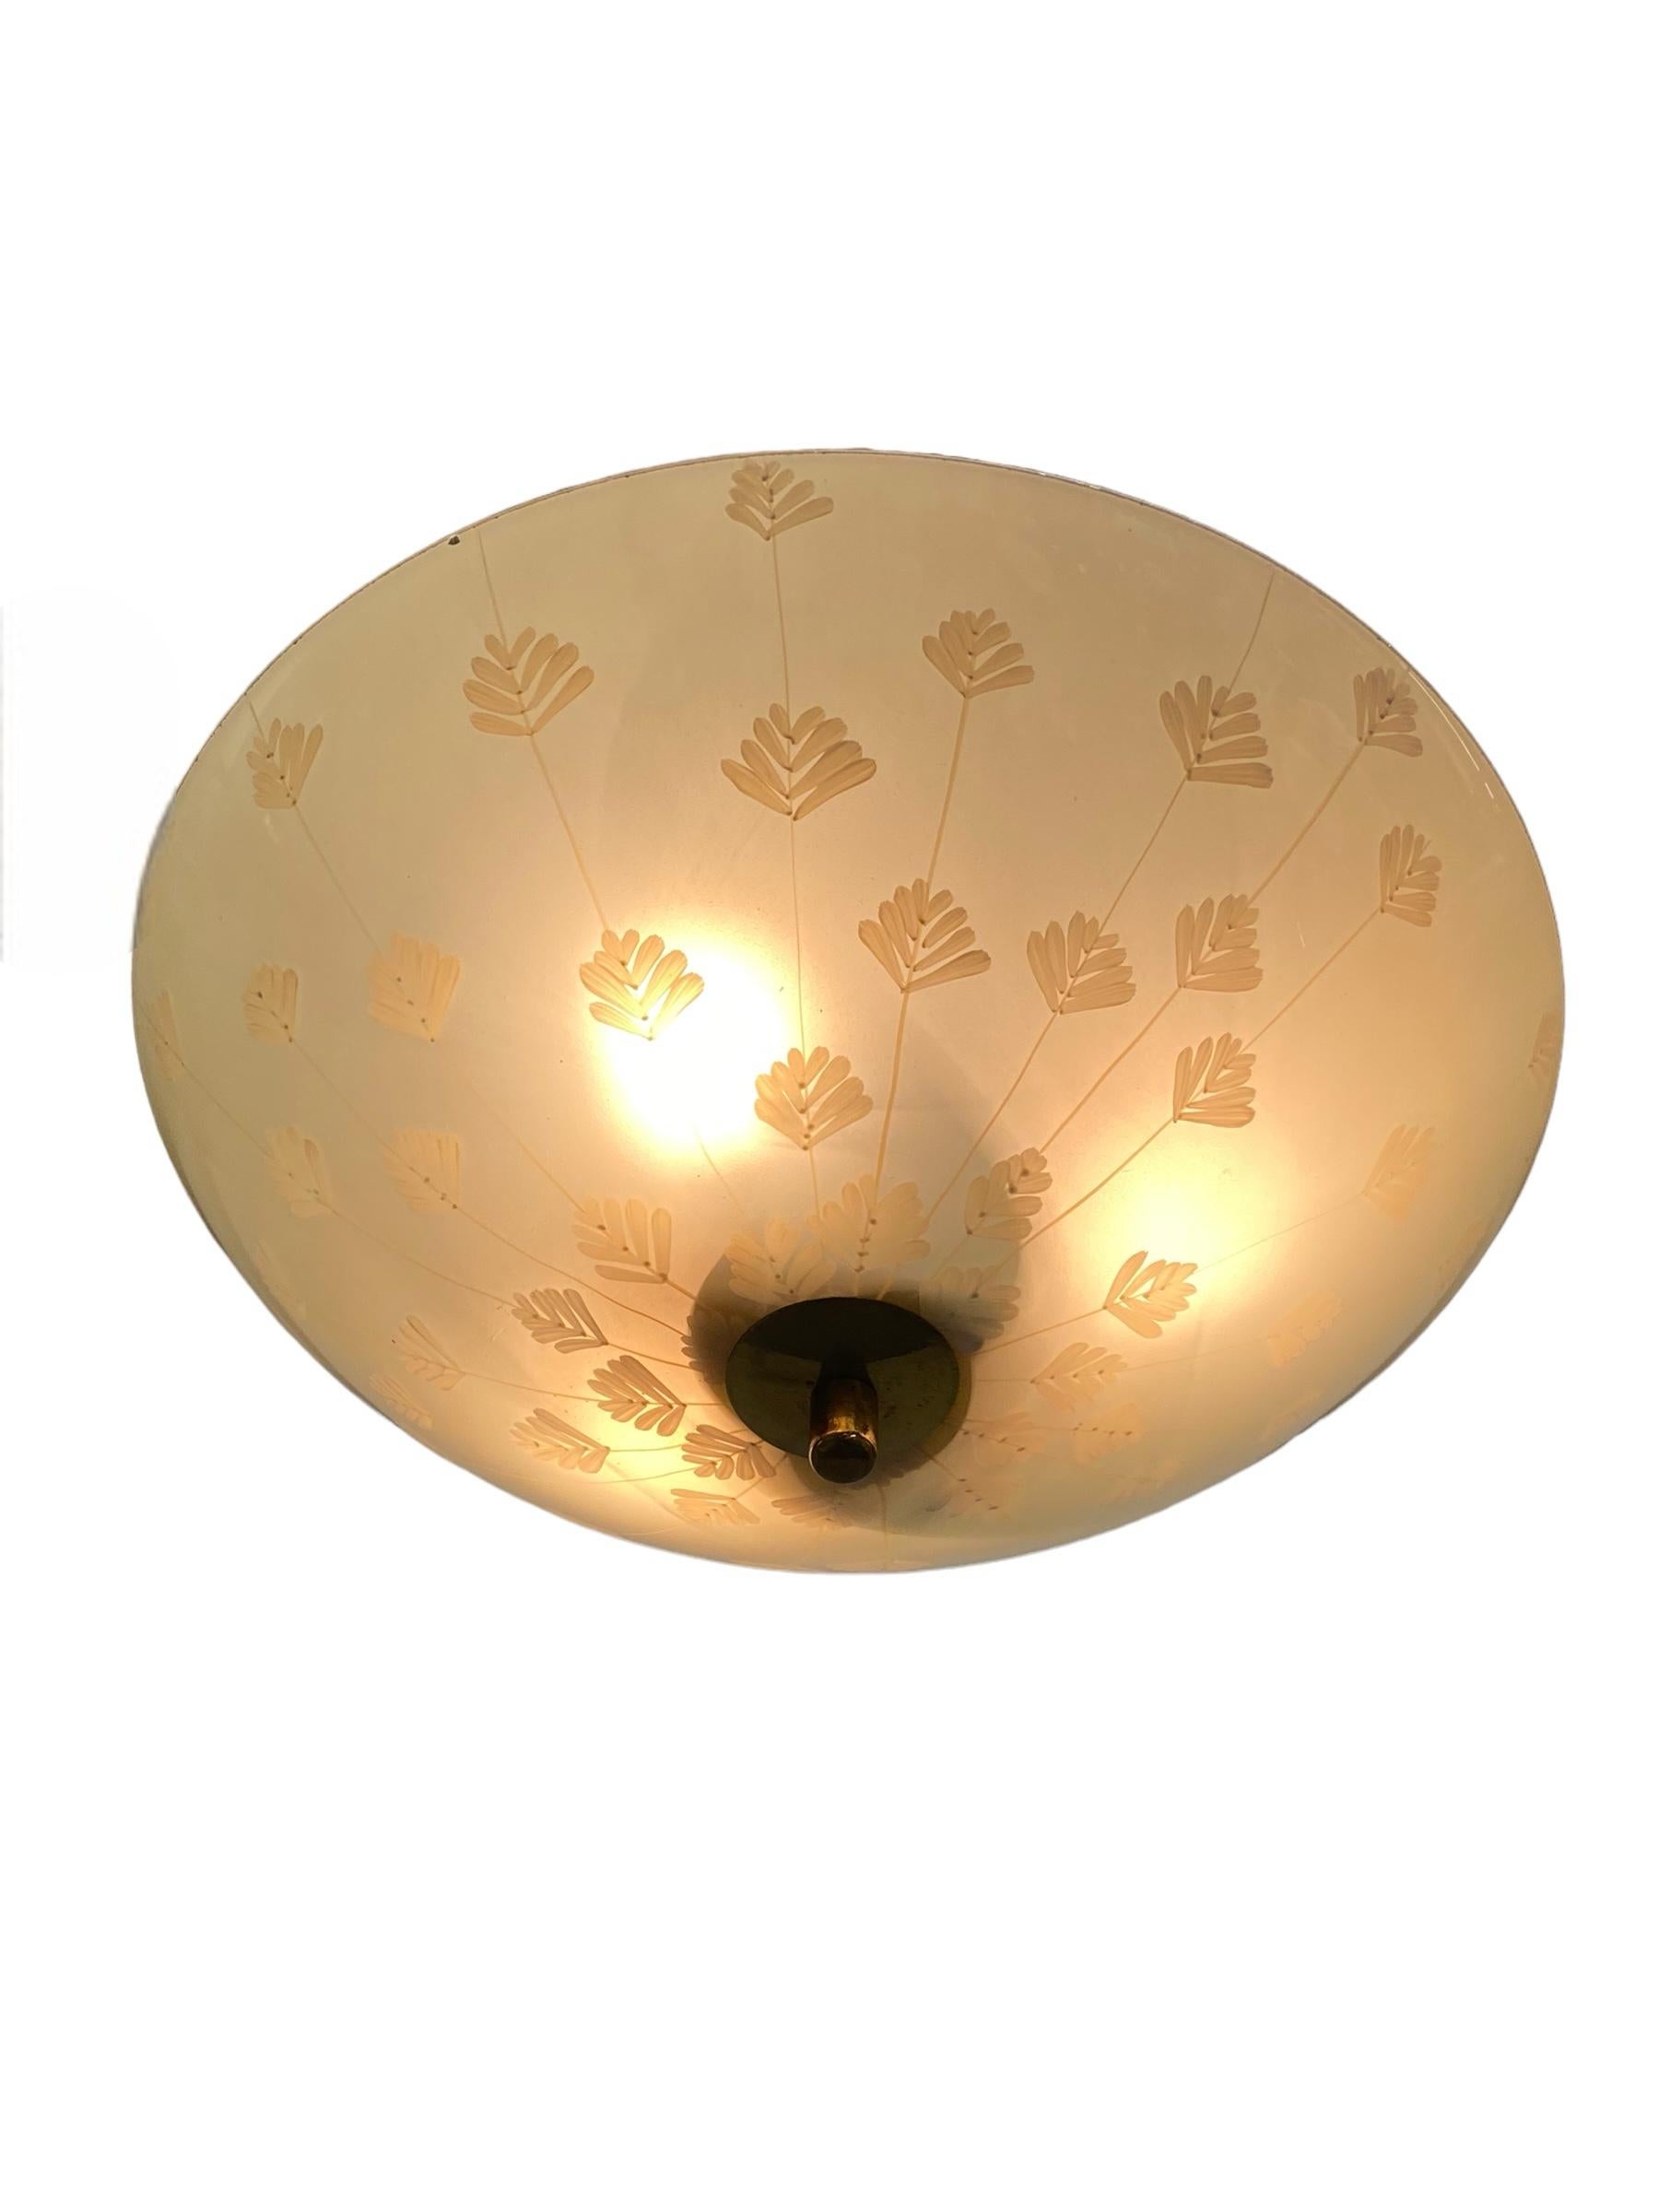 Lisa Johansson-Papé Hand-Painted Ceiling Lamp, Orno 1950s In Good Condition For Sale In Helsinki, FI